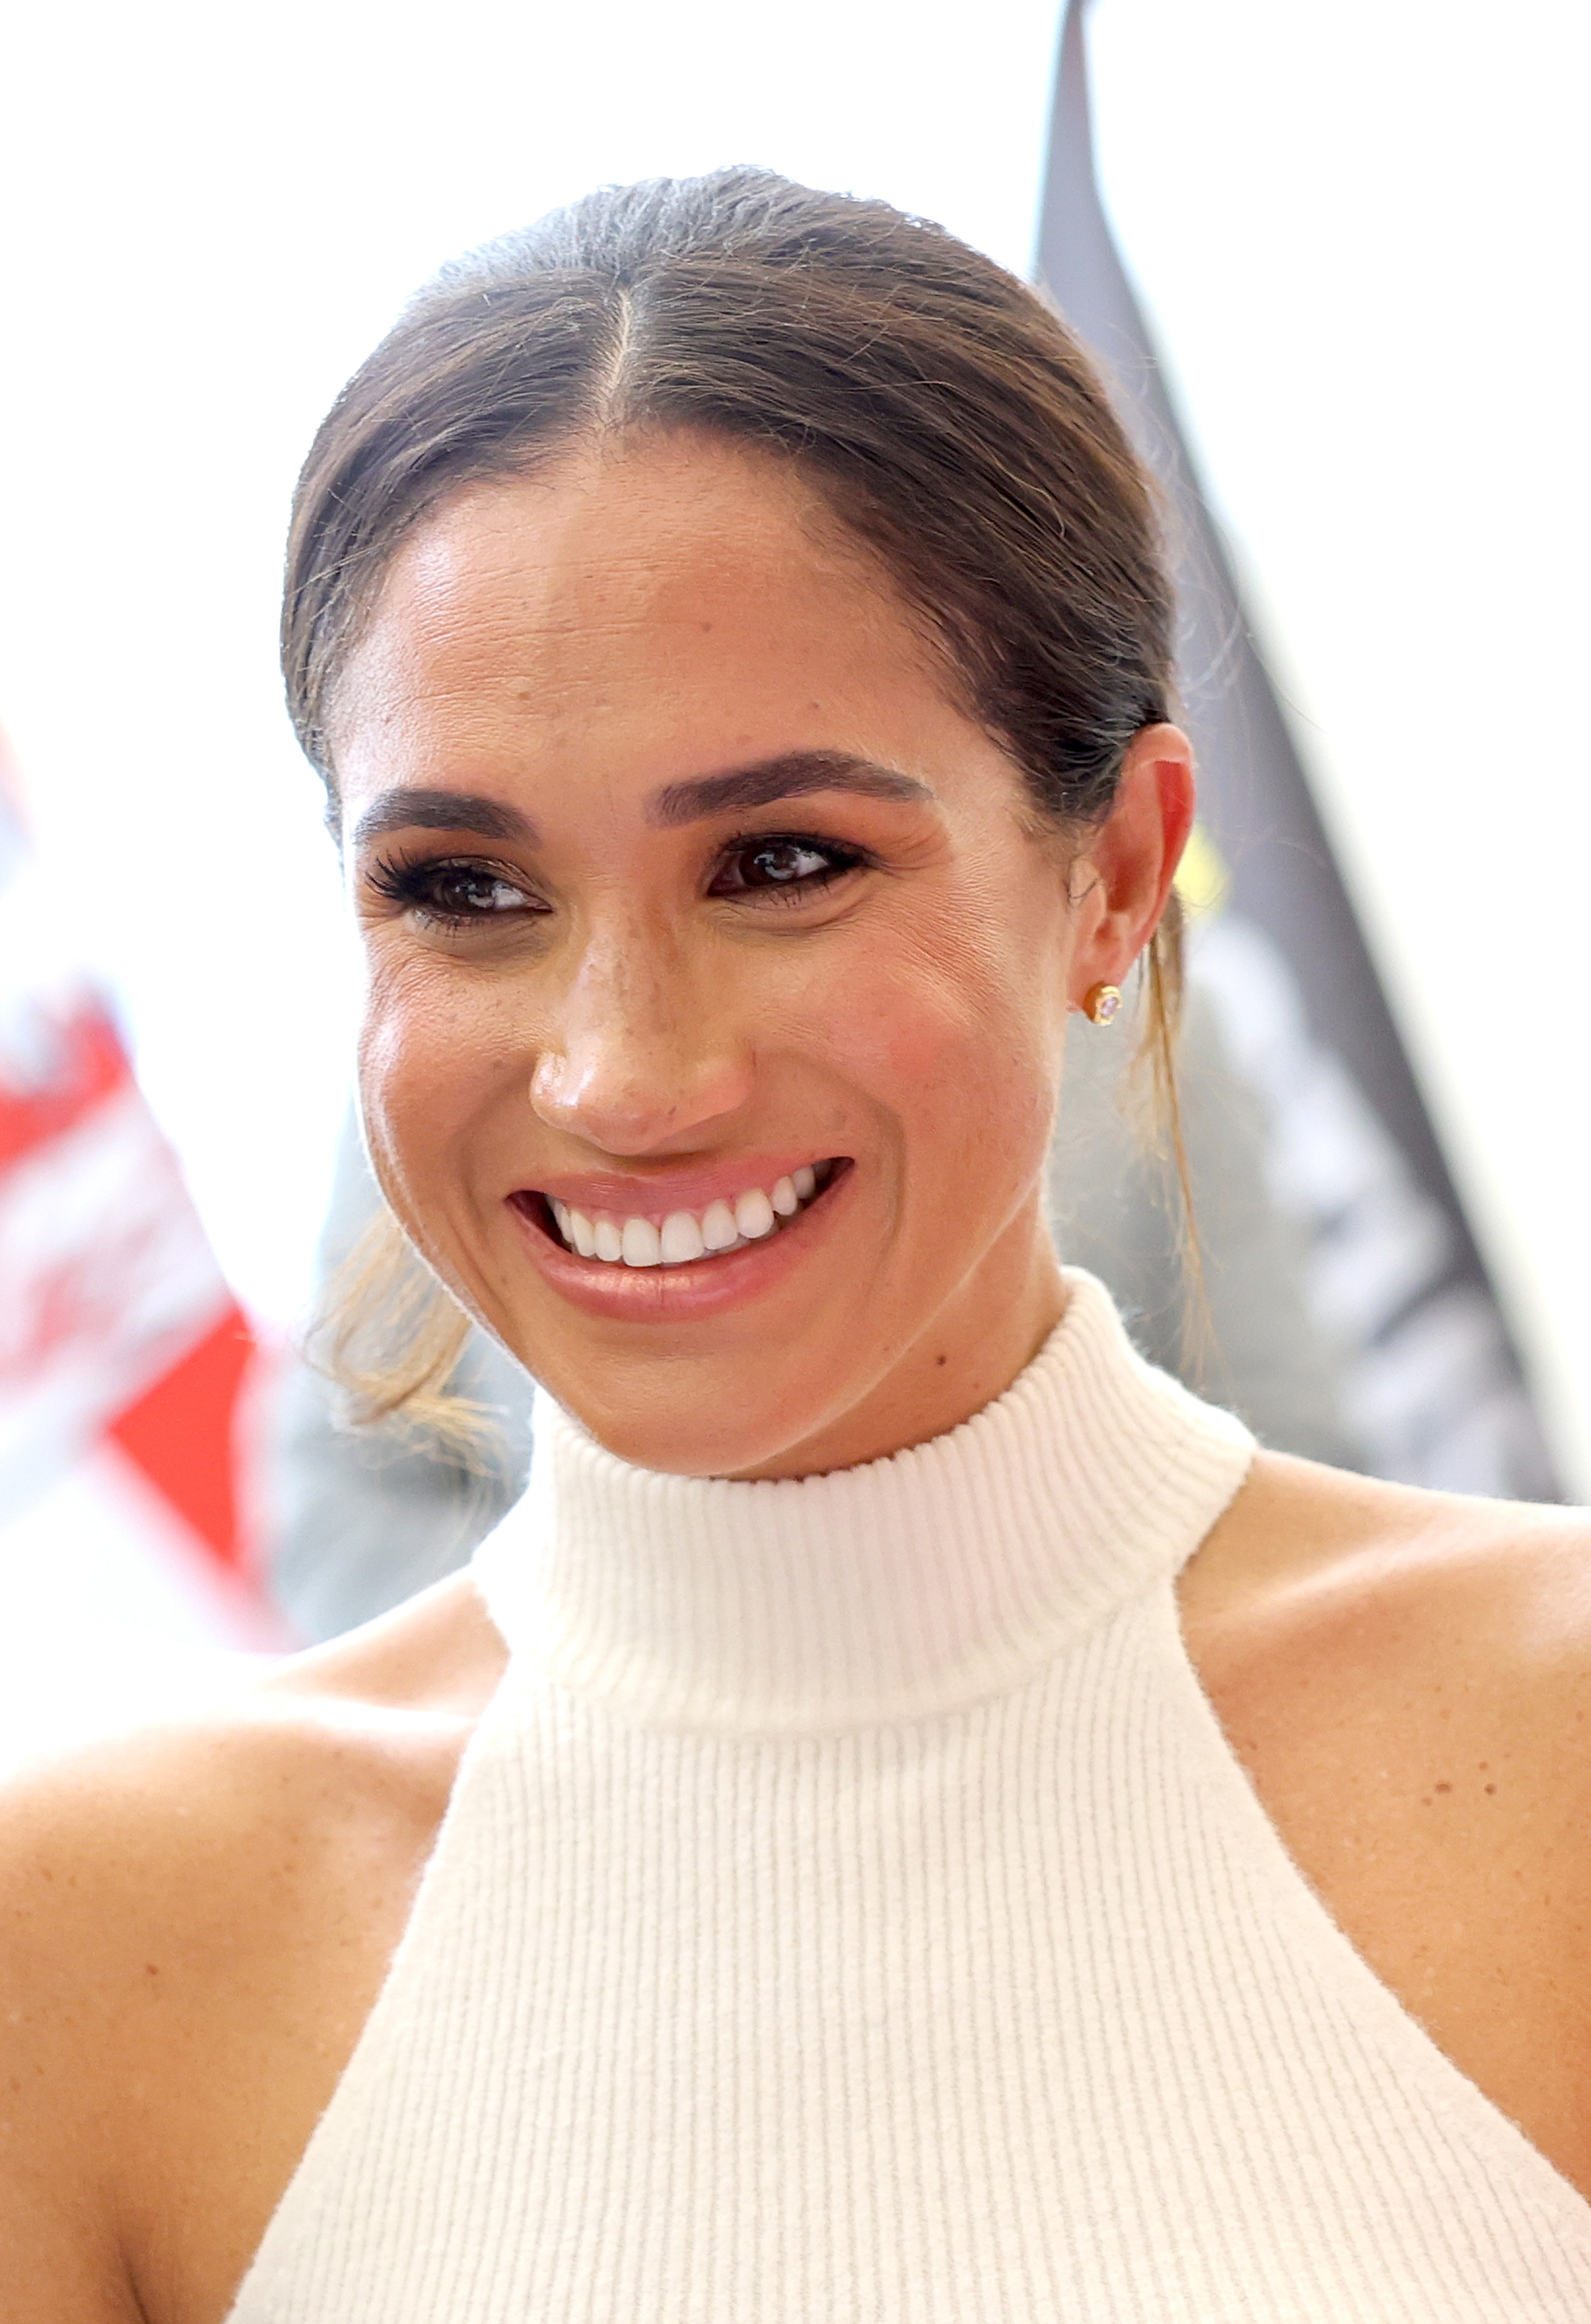 Head and shoulders image of Meghan in a white knitted high neck vest, smiling at the camera with her hair tied back